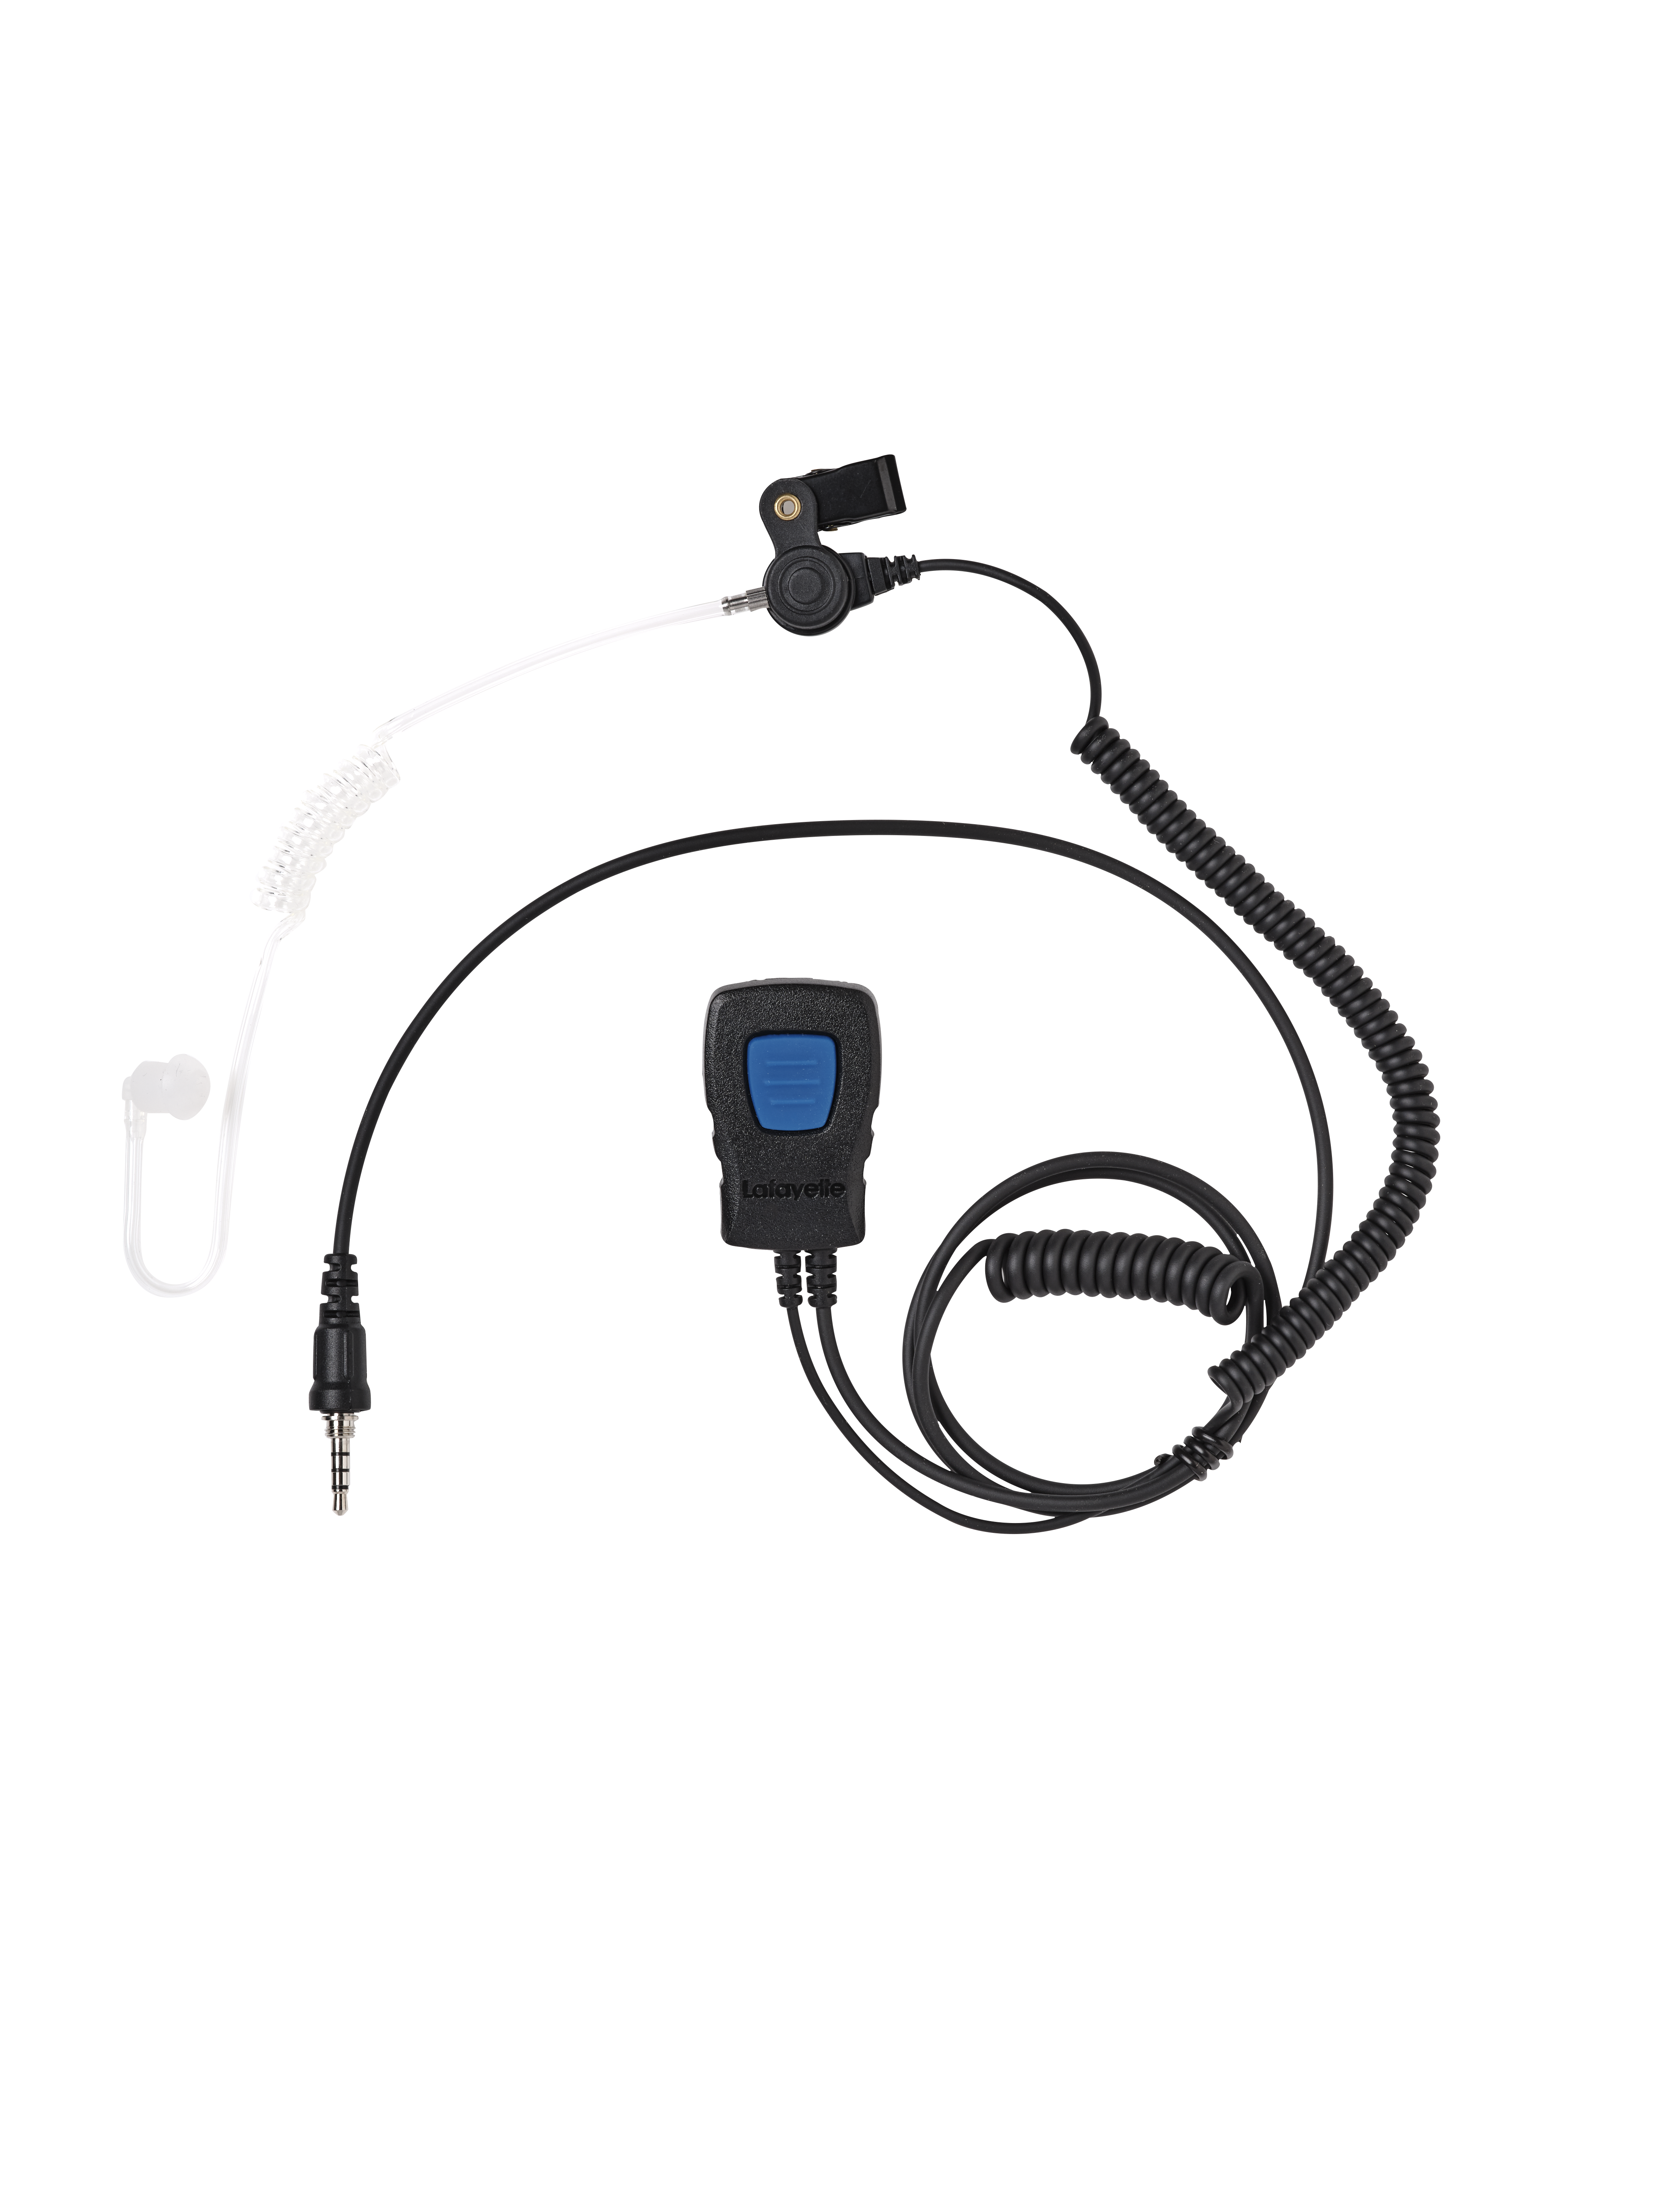 Lafayette Security Miniheadset Extra lÃ¥ng kabel